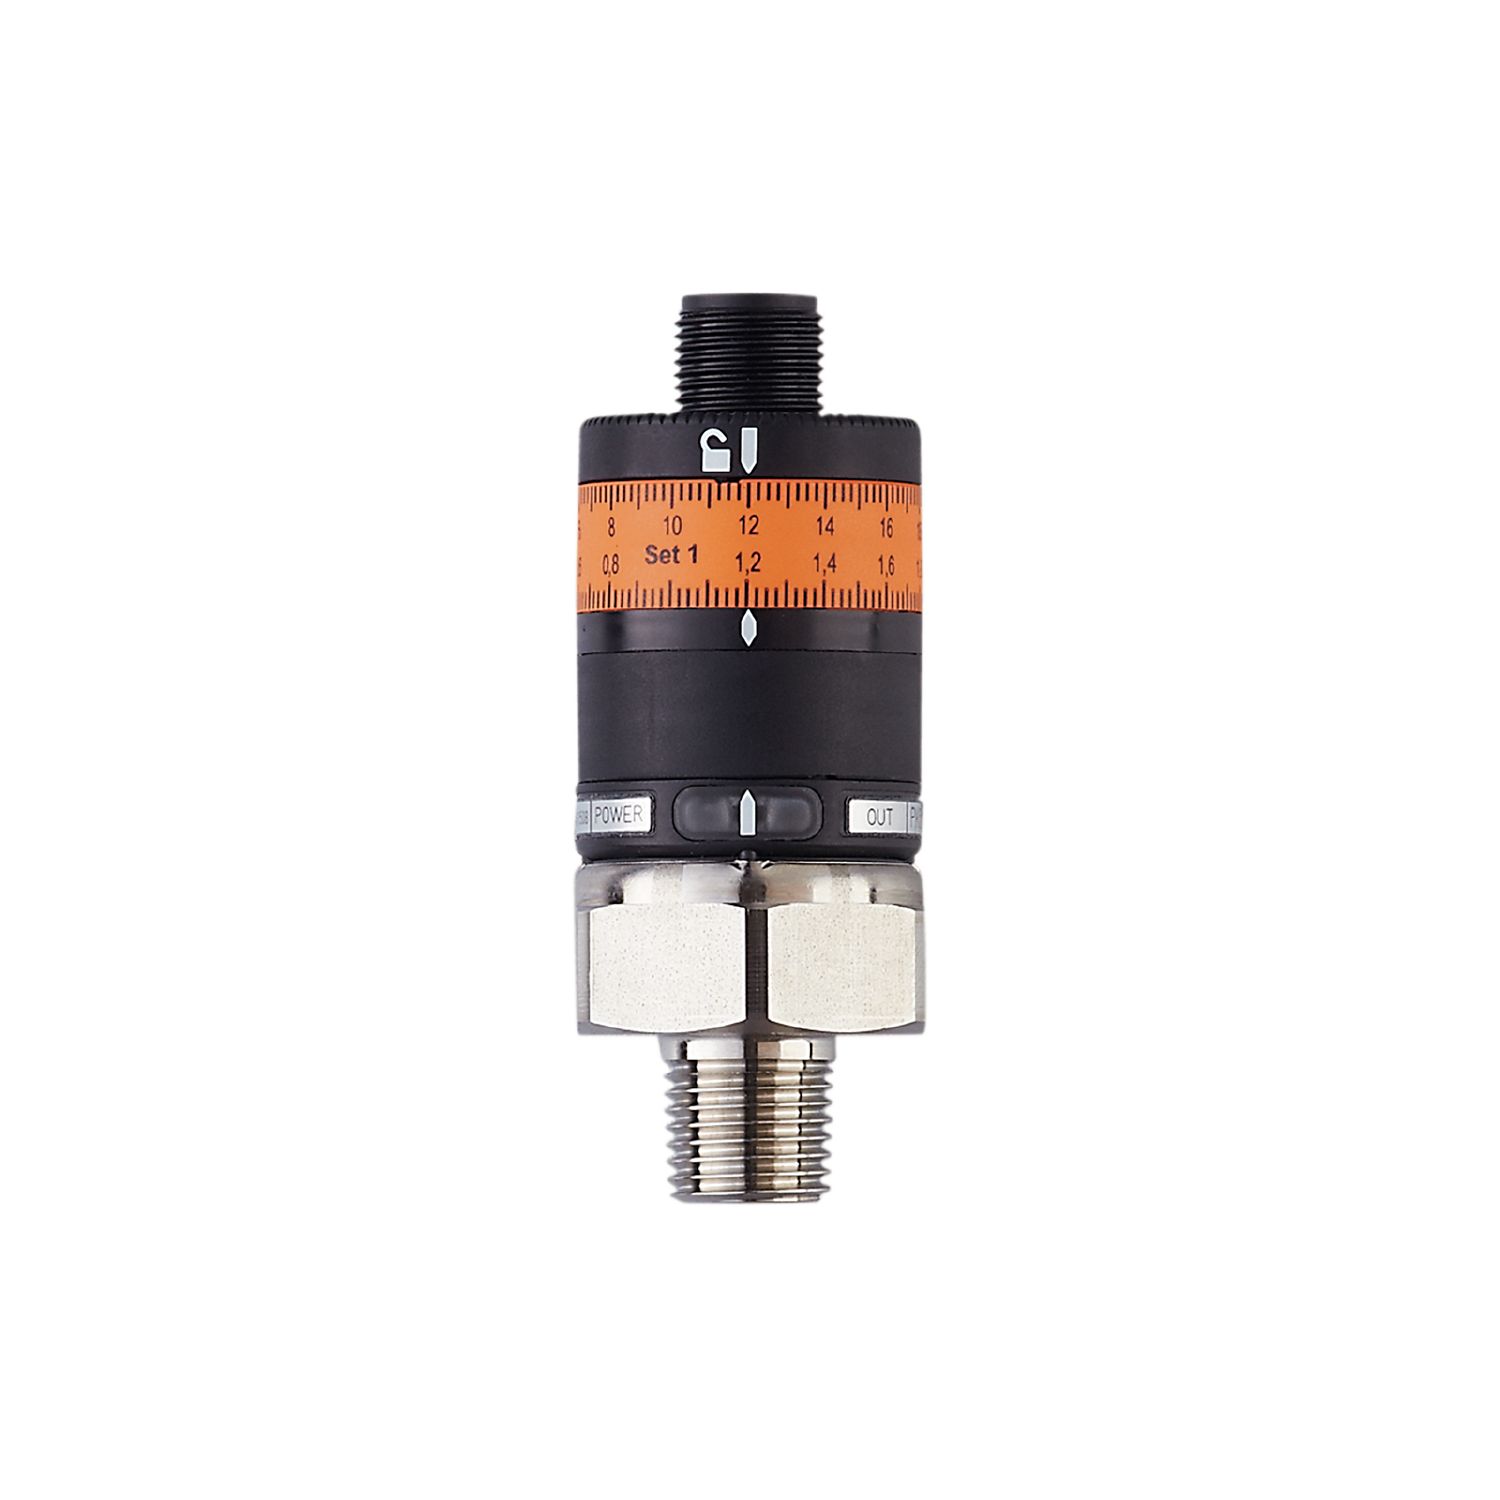 PK5722 - Pressure switch with intuitive switch point setting - ifm